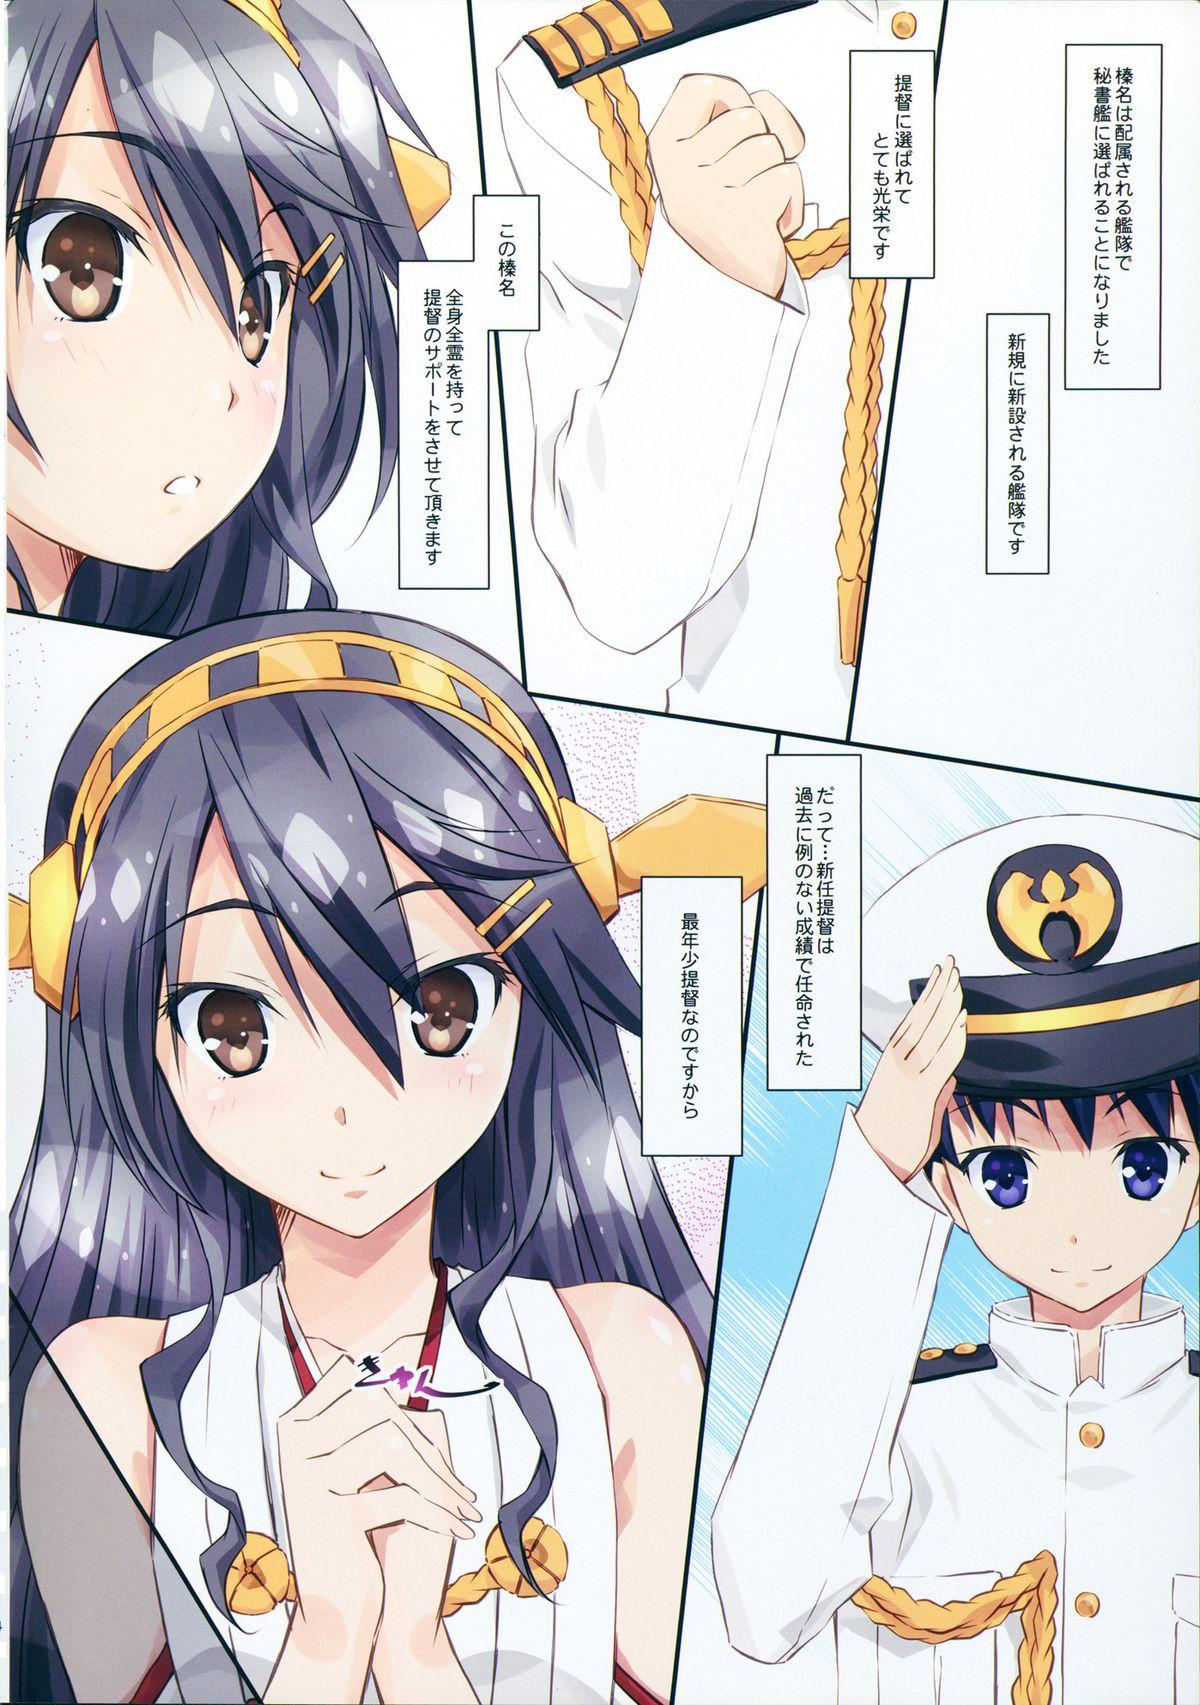 Gostosas Haruna to Issho - Kantai collection Uncensored - Page 4